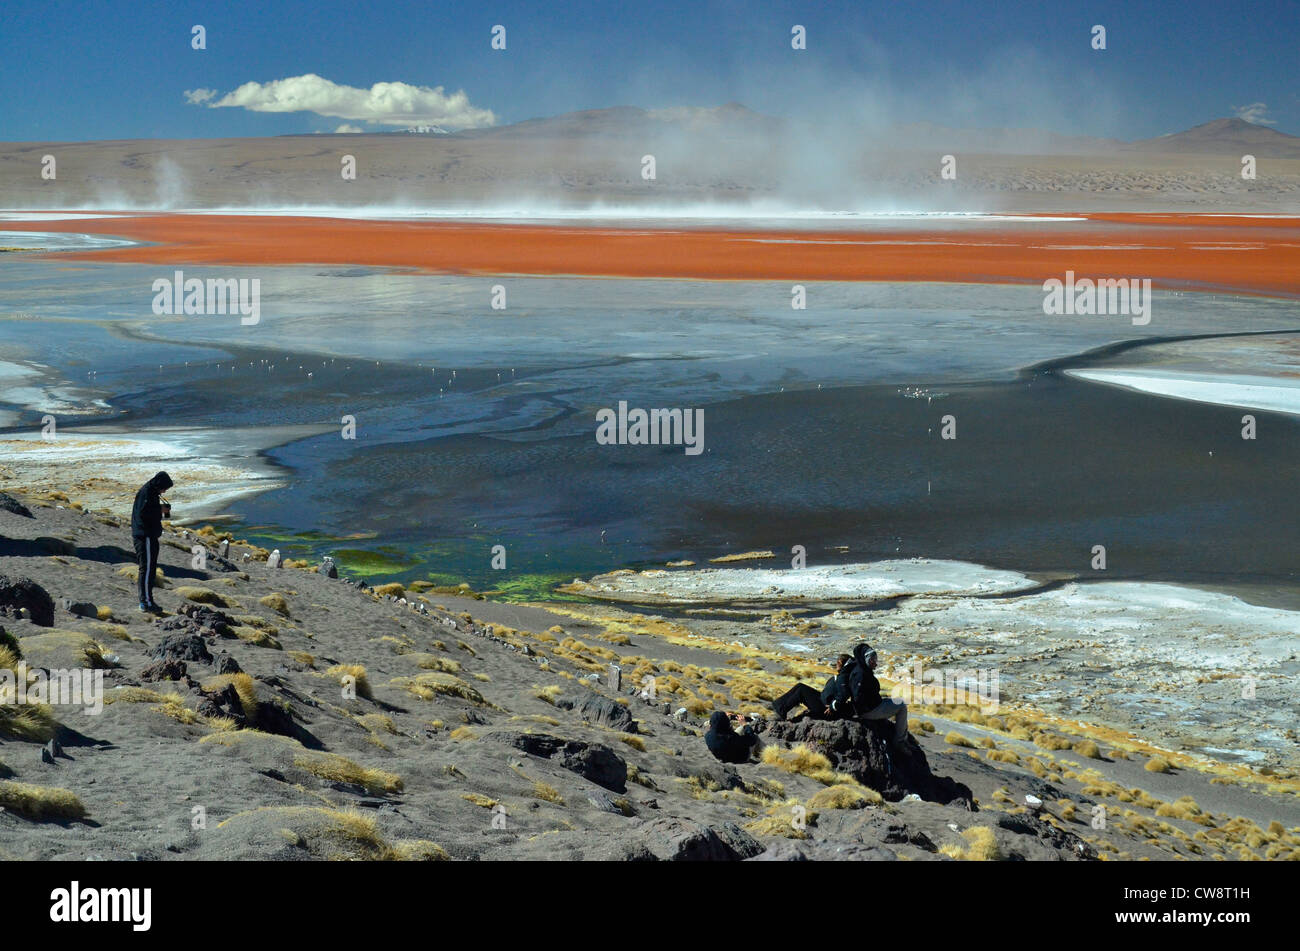 Travel in high altitude of Altiplano plateau in Bolivia, South America. Tourists viewing lake Colorada on icy day. Stock Photo